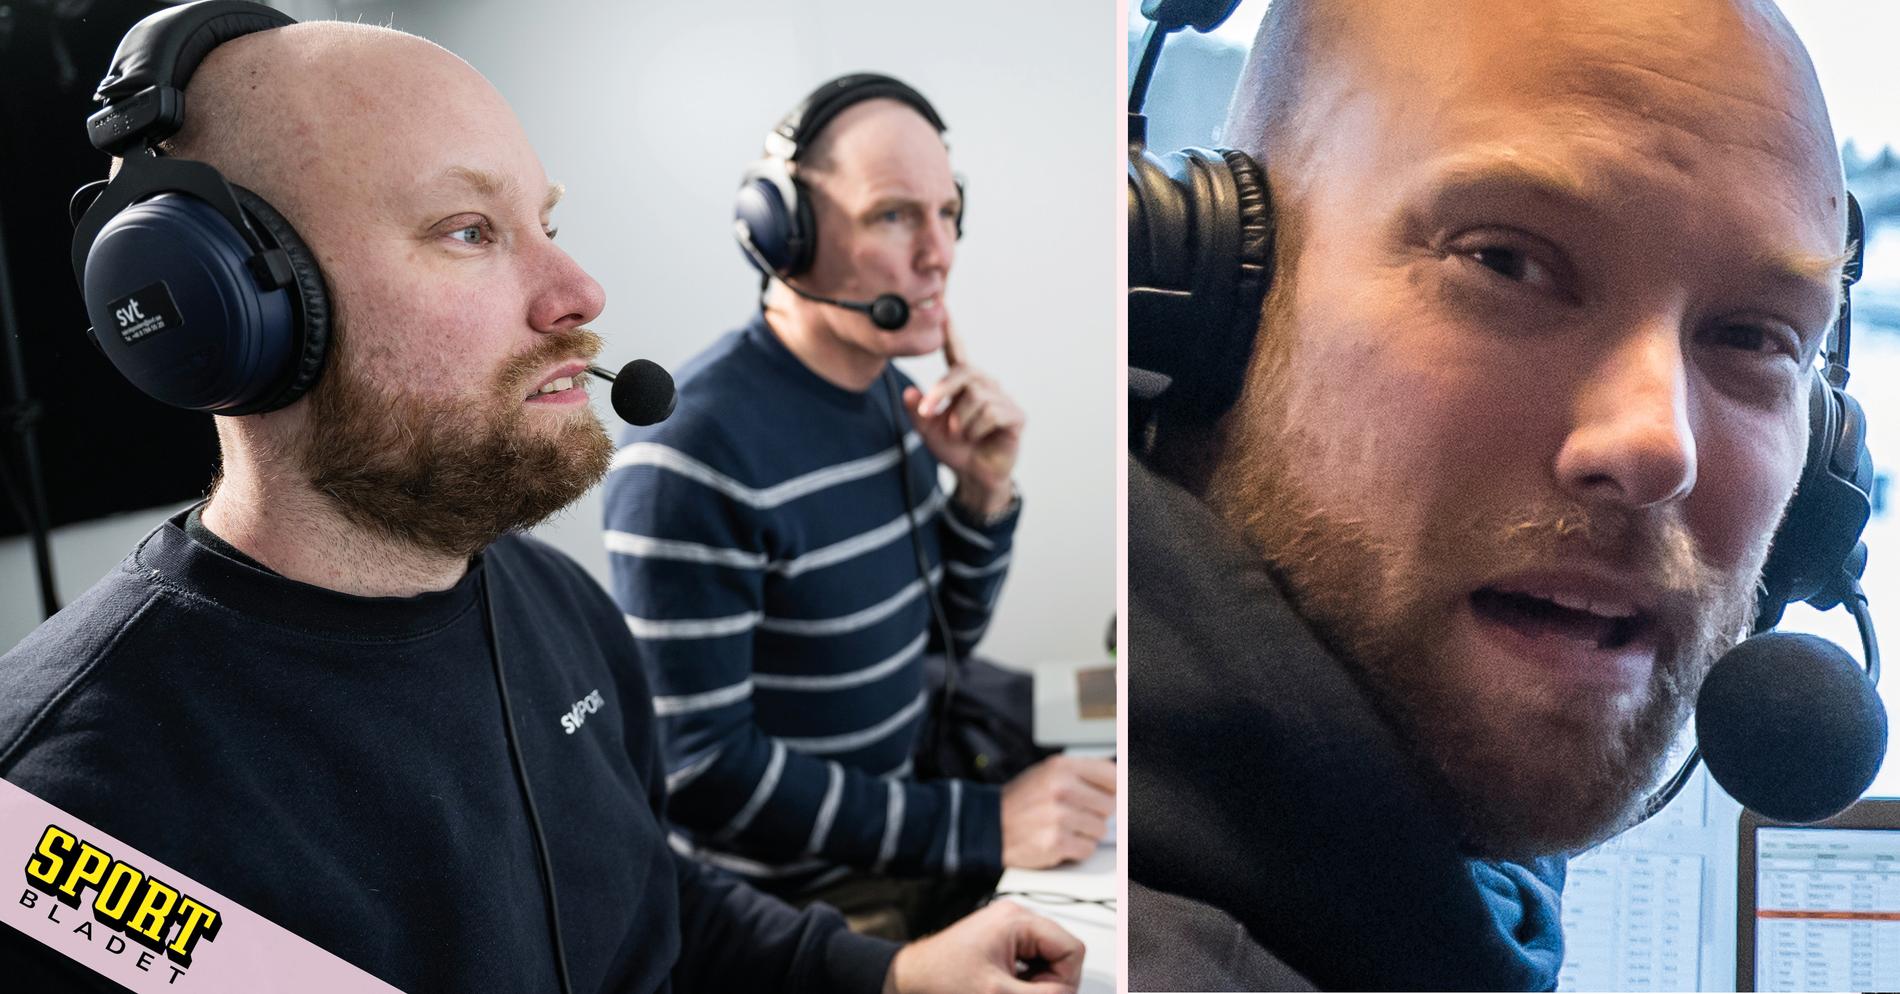 Drama in the Commentary Booth: Talgoxe Visits Björn Ferry and Ola Bränholm during Sebastian Samuelsson’s Biathlon Victory